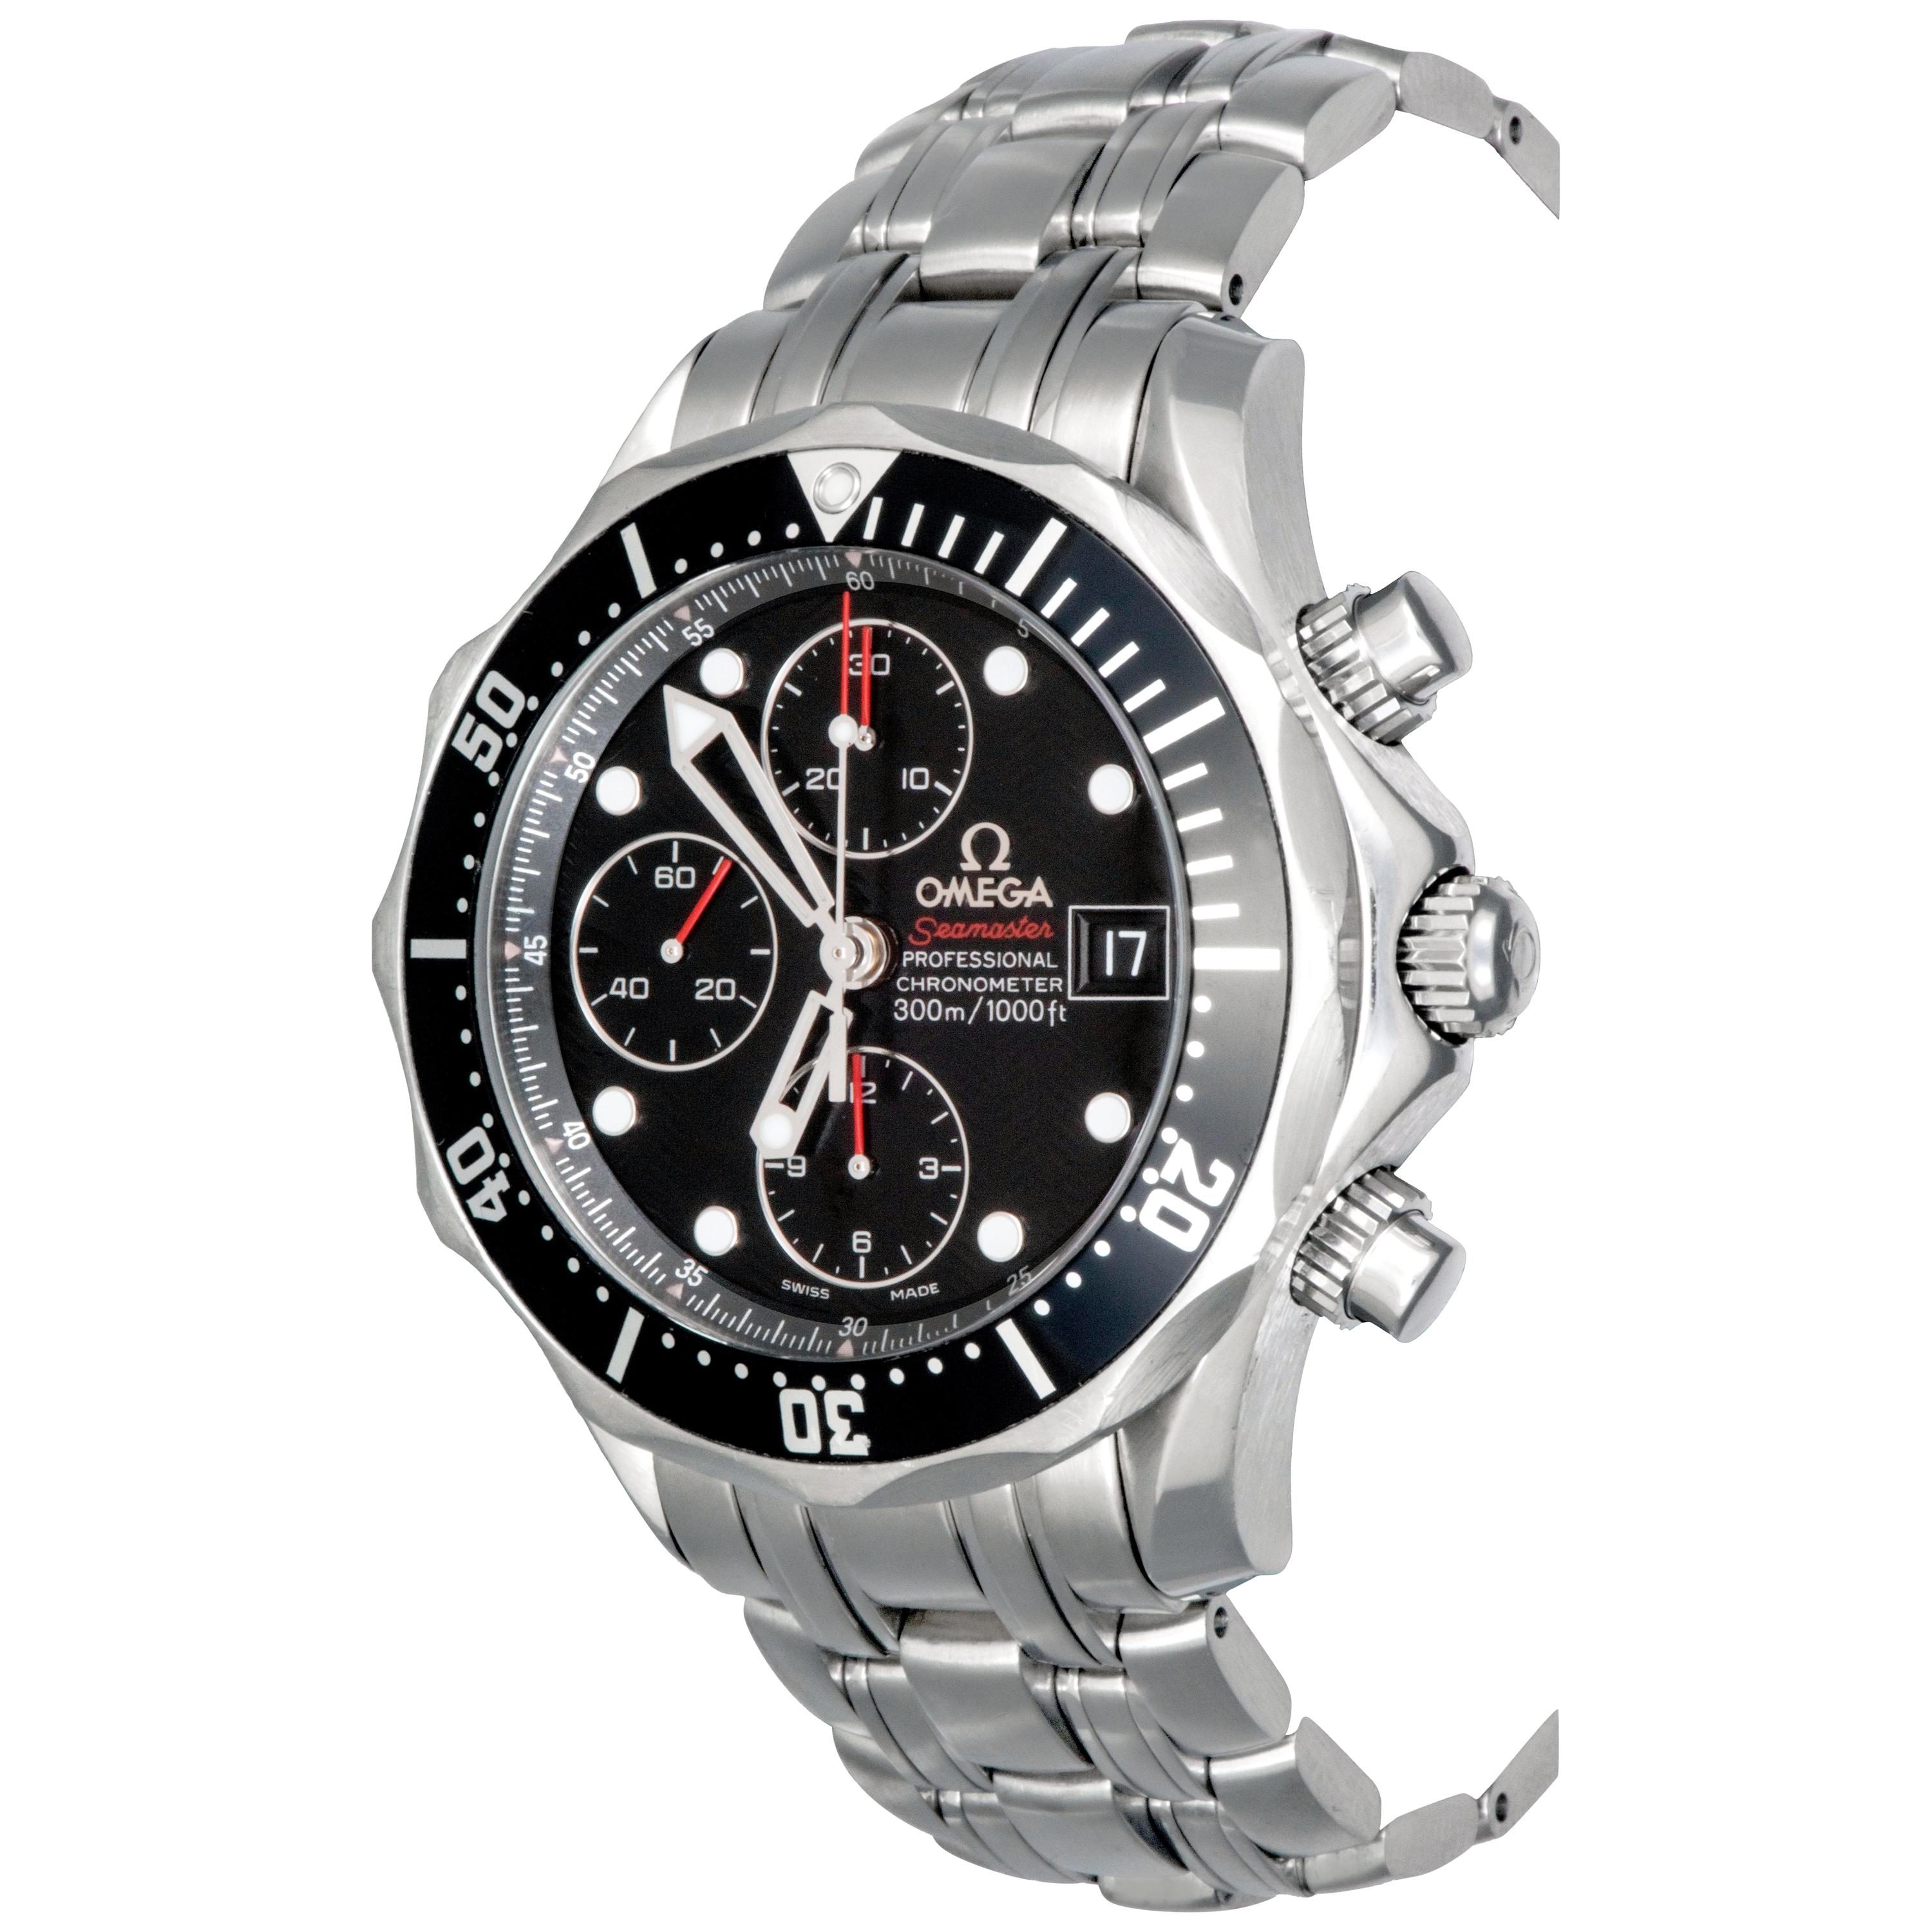 Omega Stainless Steel Seamaster Professional Chronograph Automatic Wristwatch